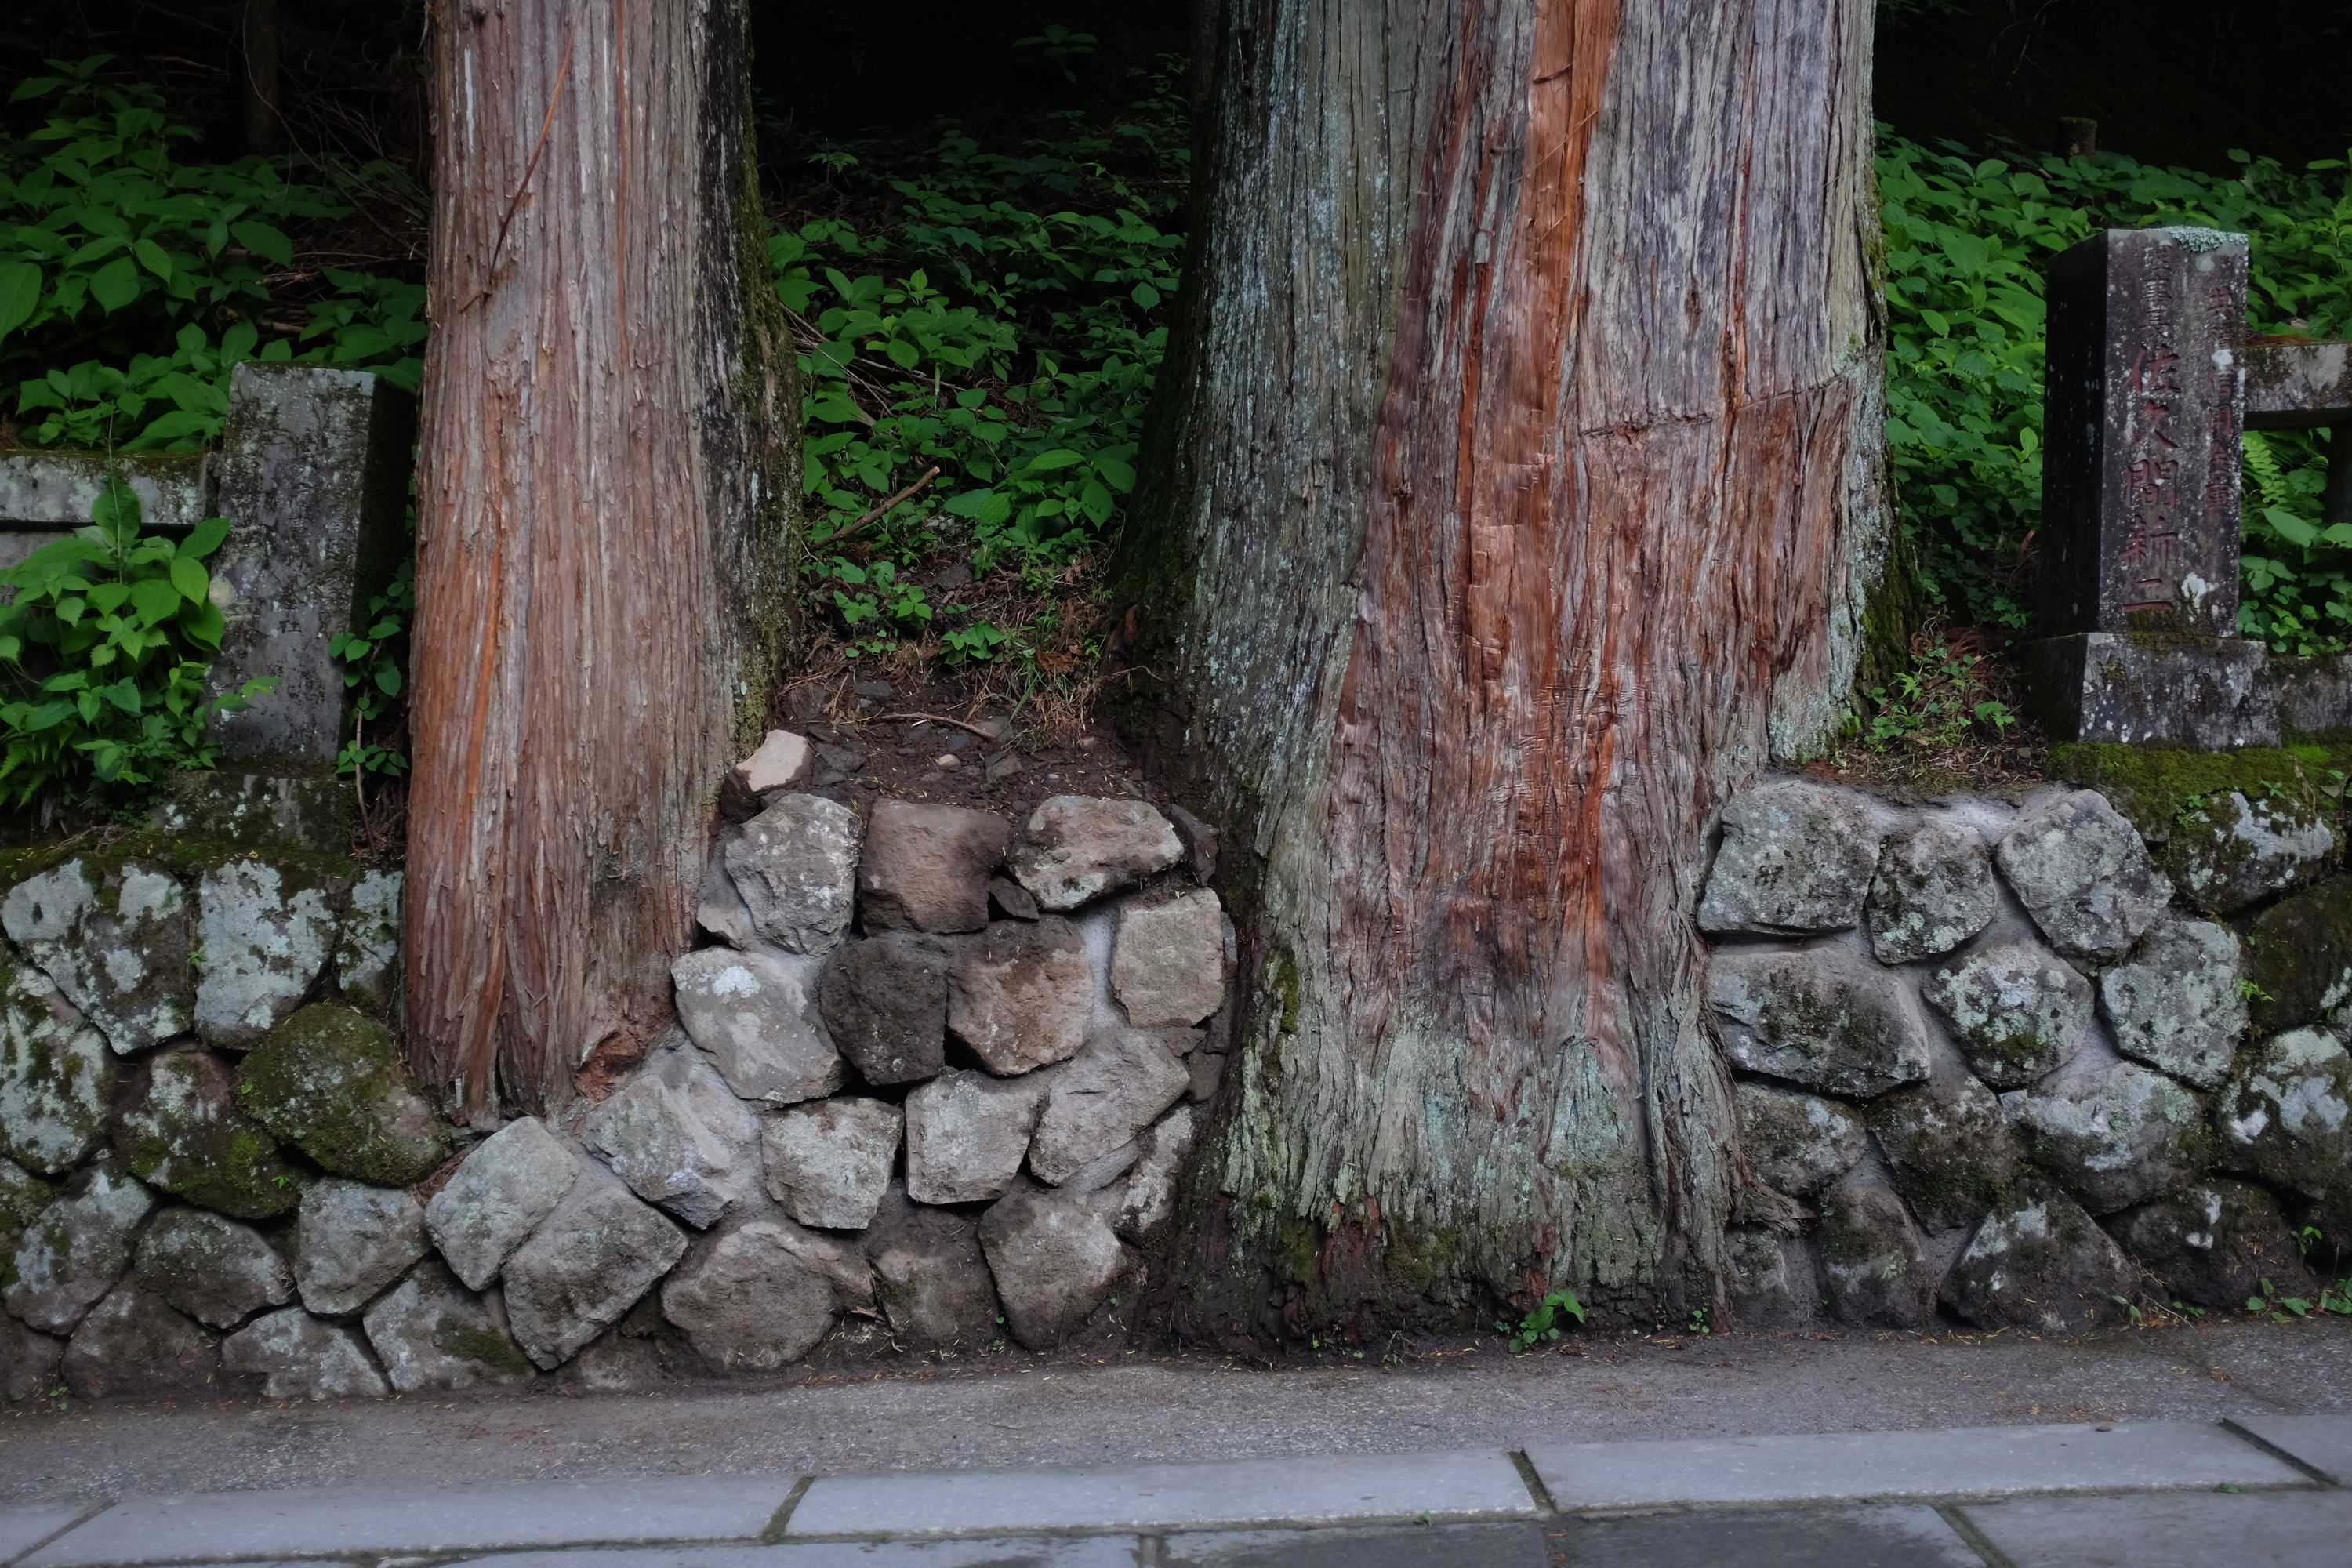 The trunks of two living cedars built into a rock wall.